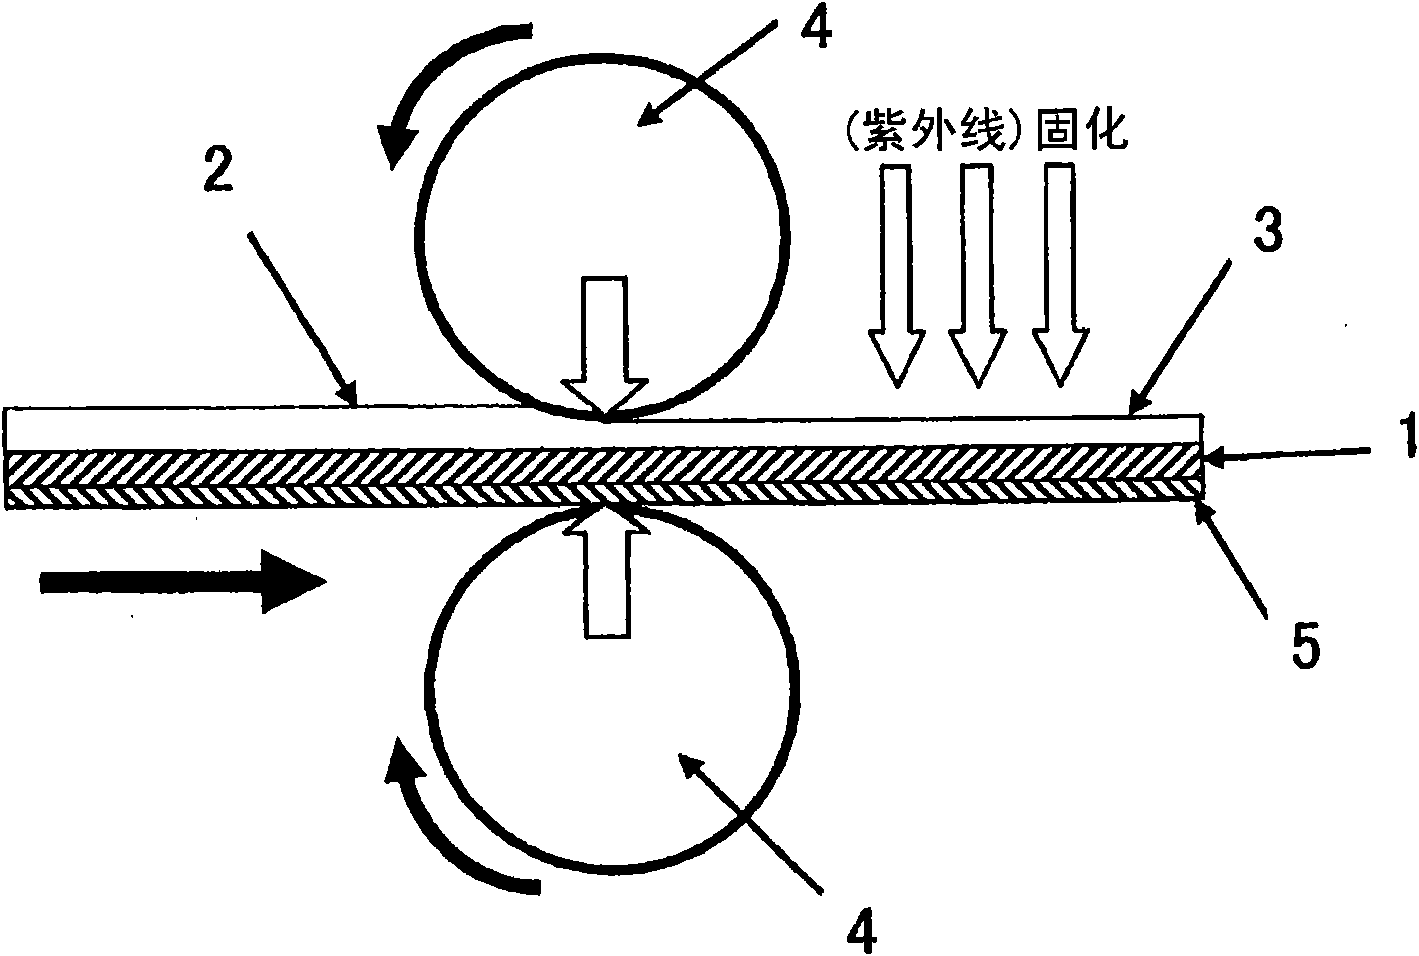 Flexible transparent conductive film, flexible functional device, and methods for producing these